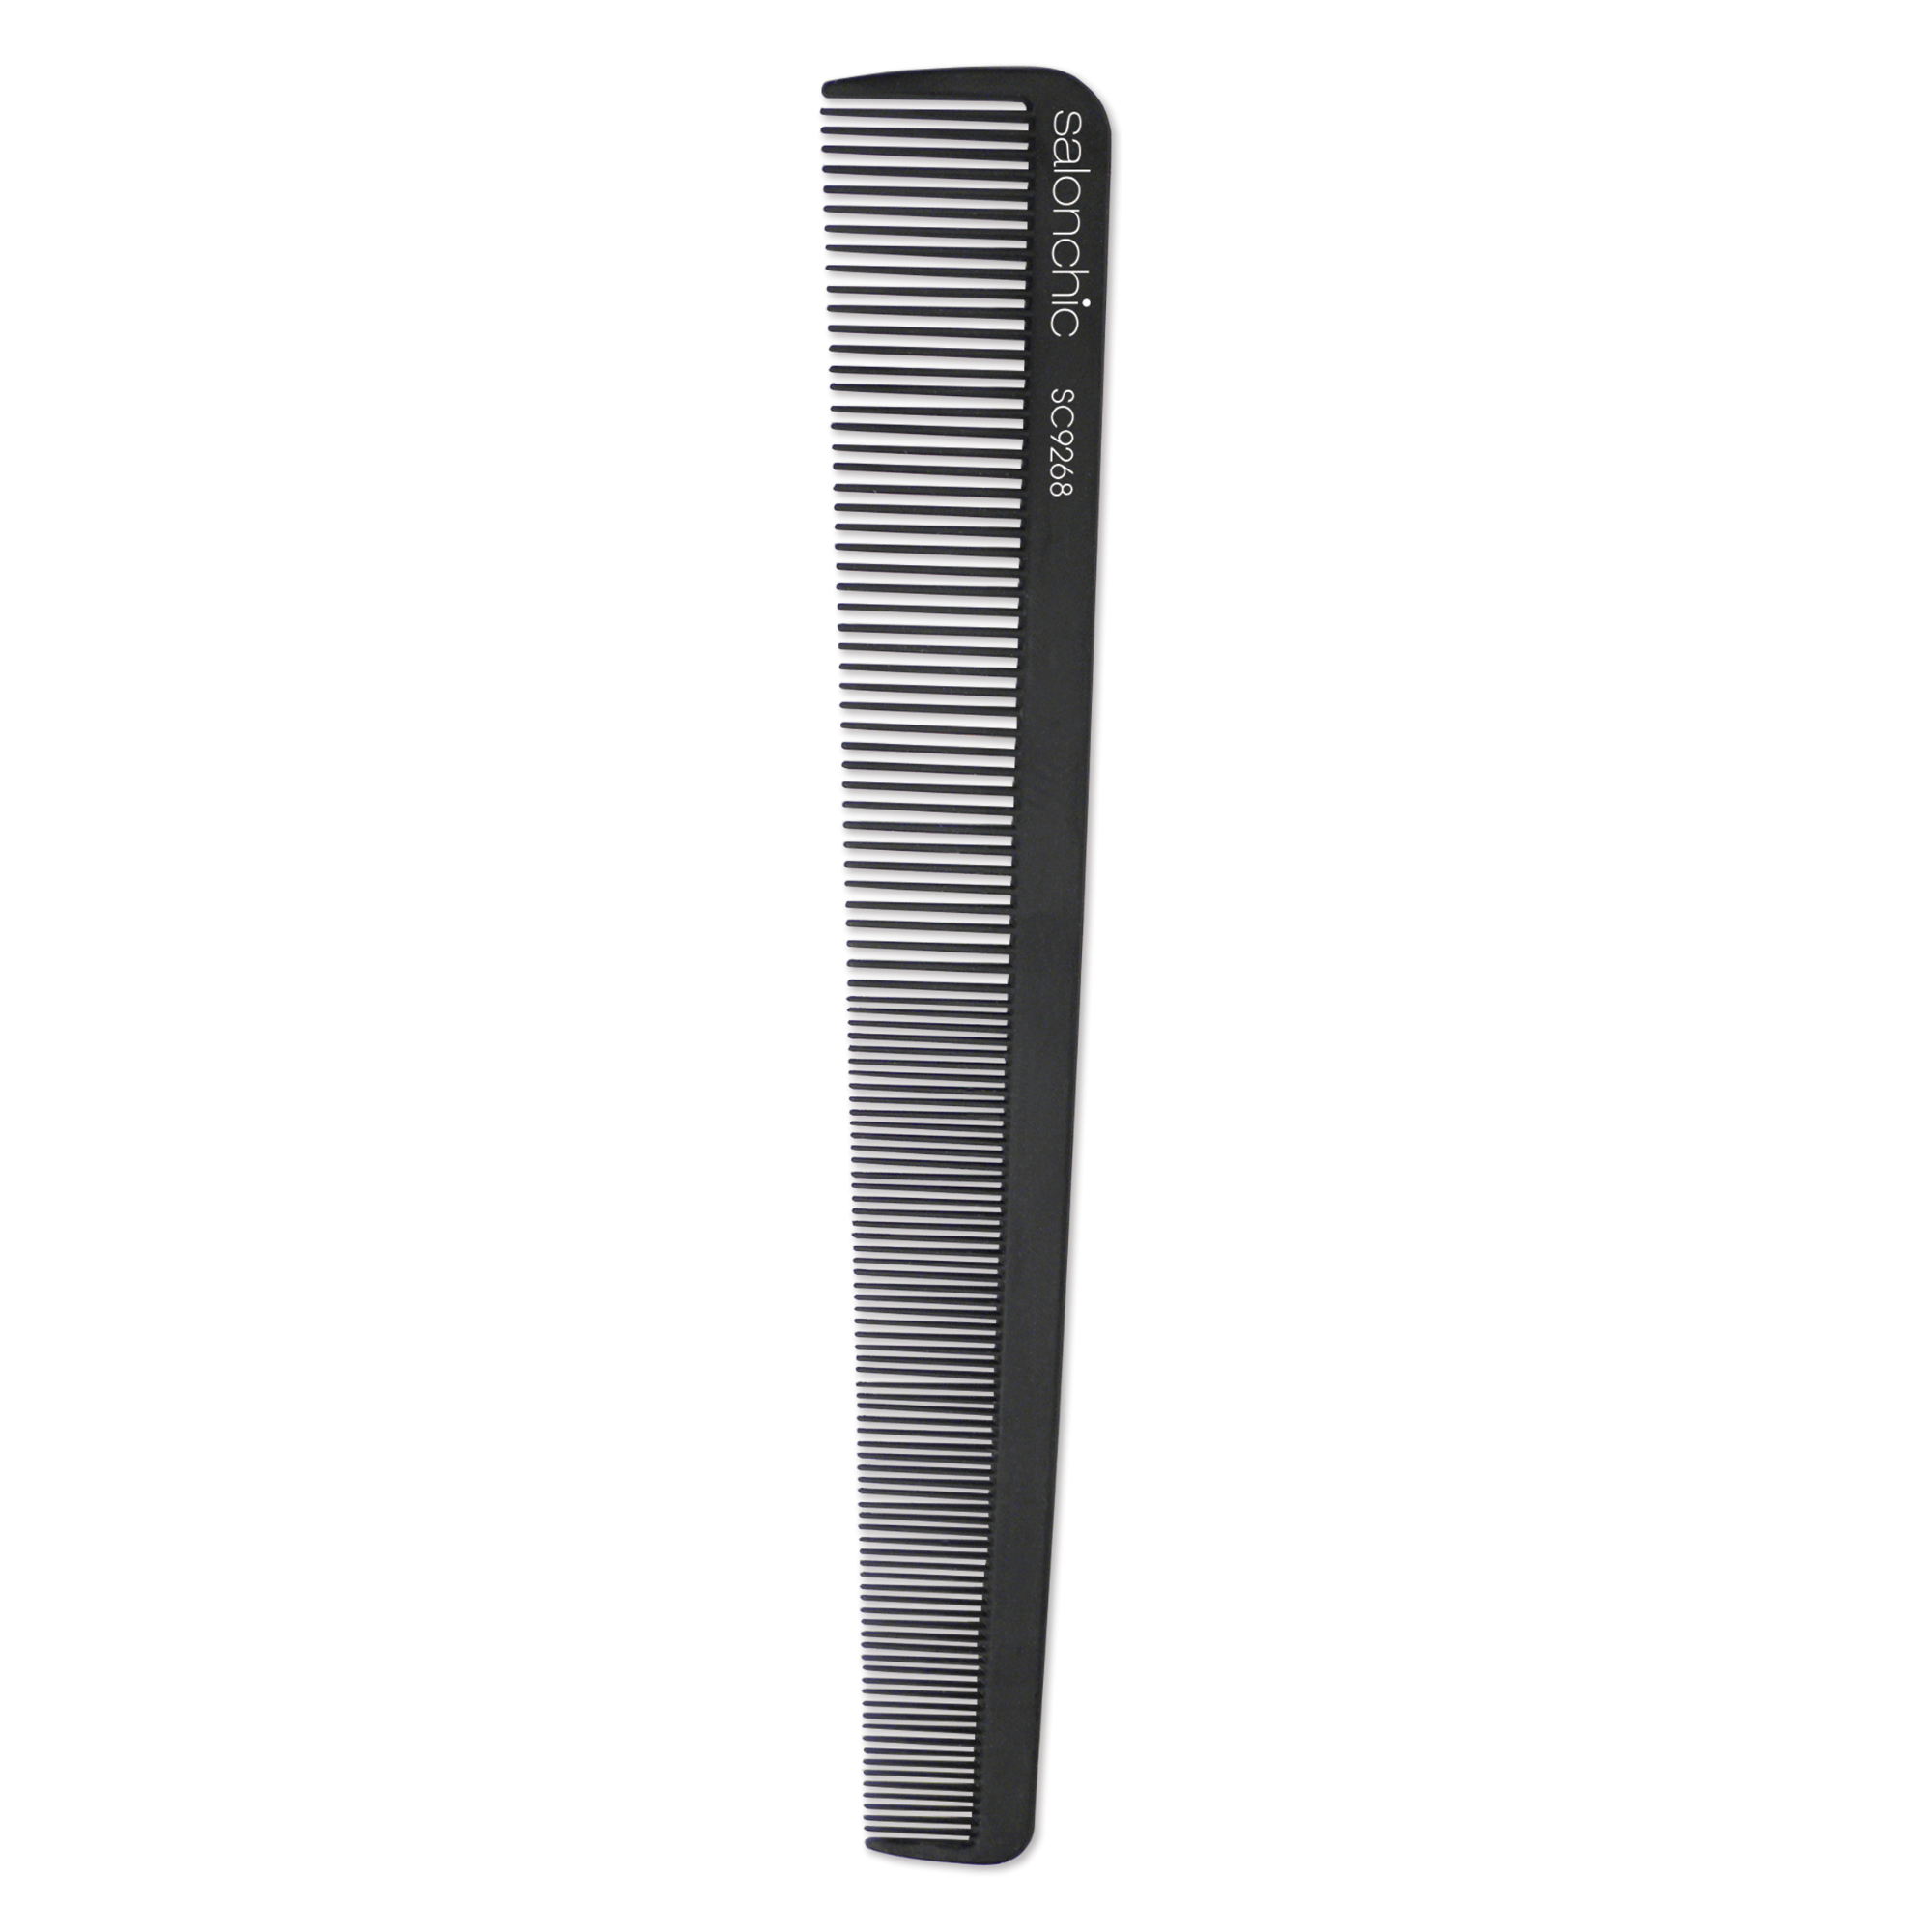 Carbon Barber Styling Comb - 8"